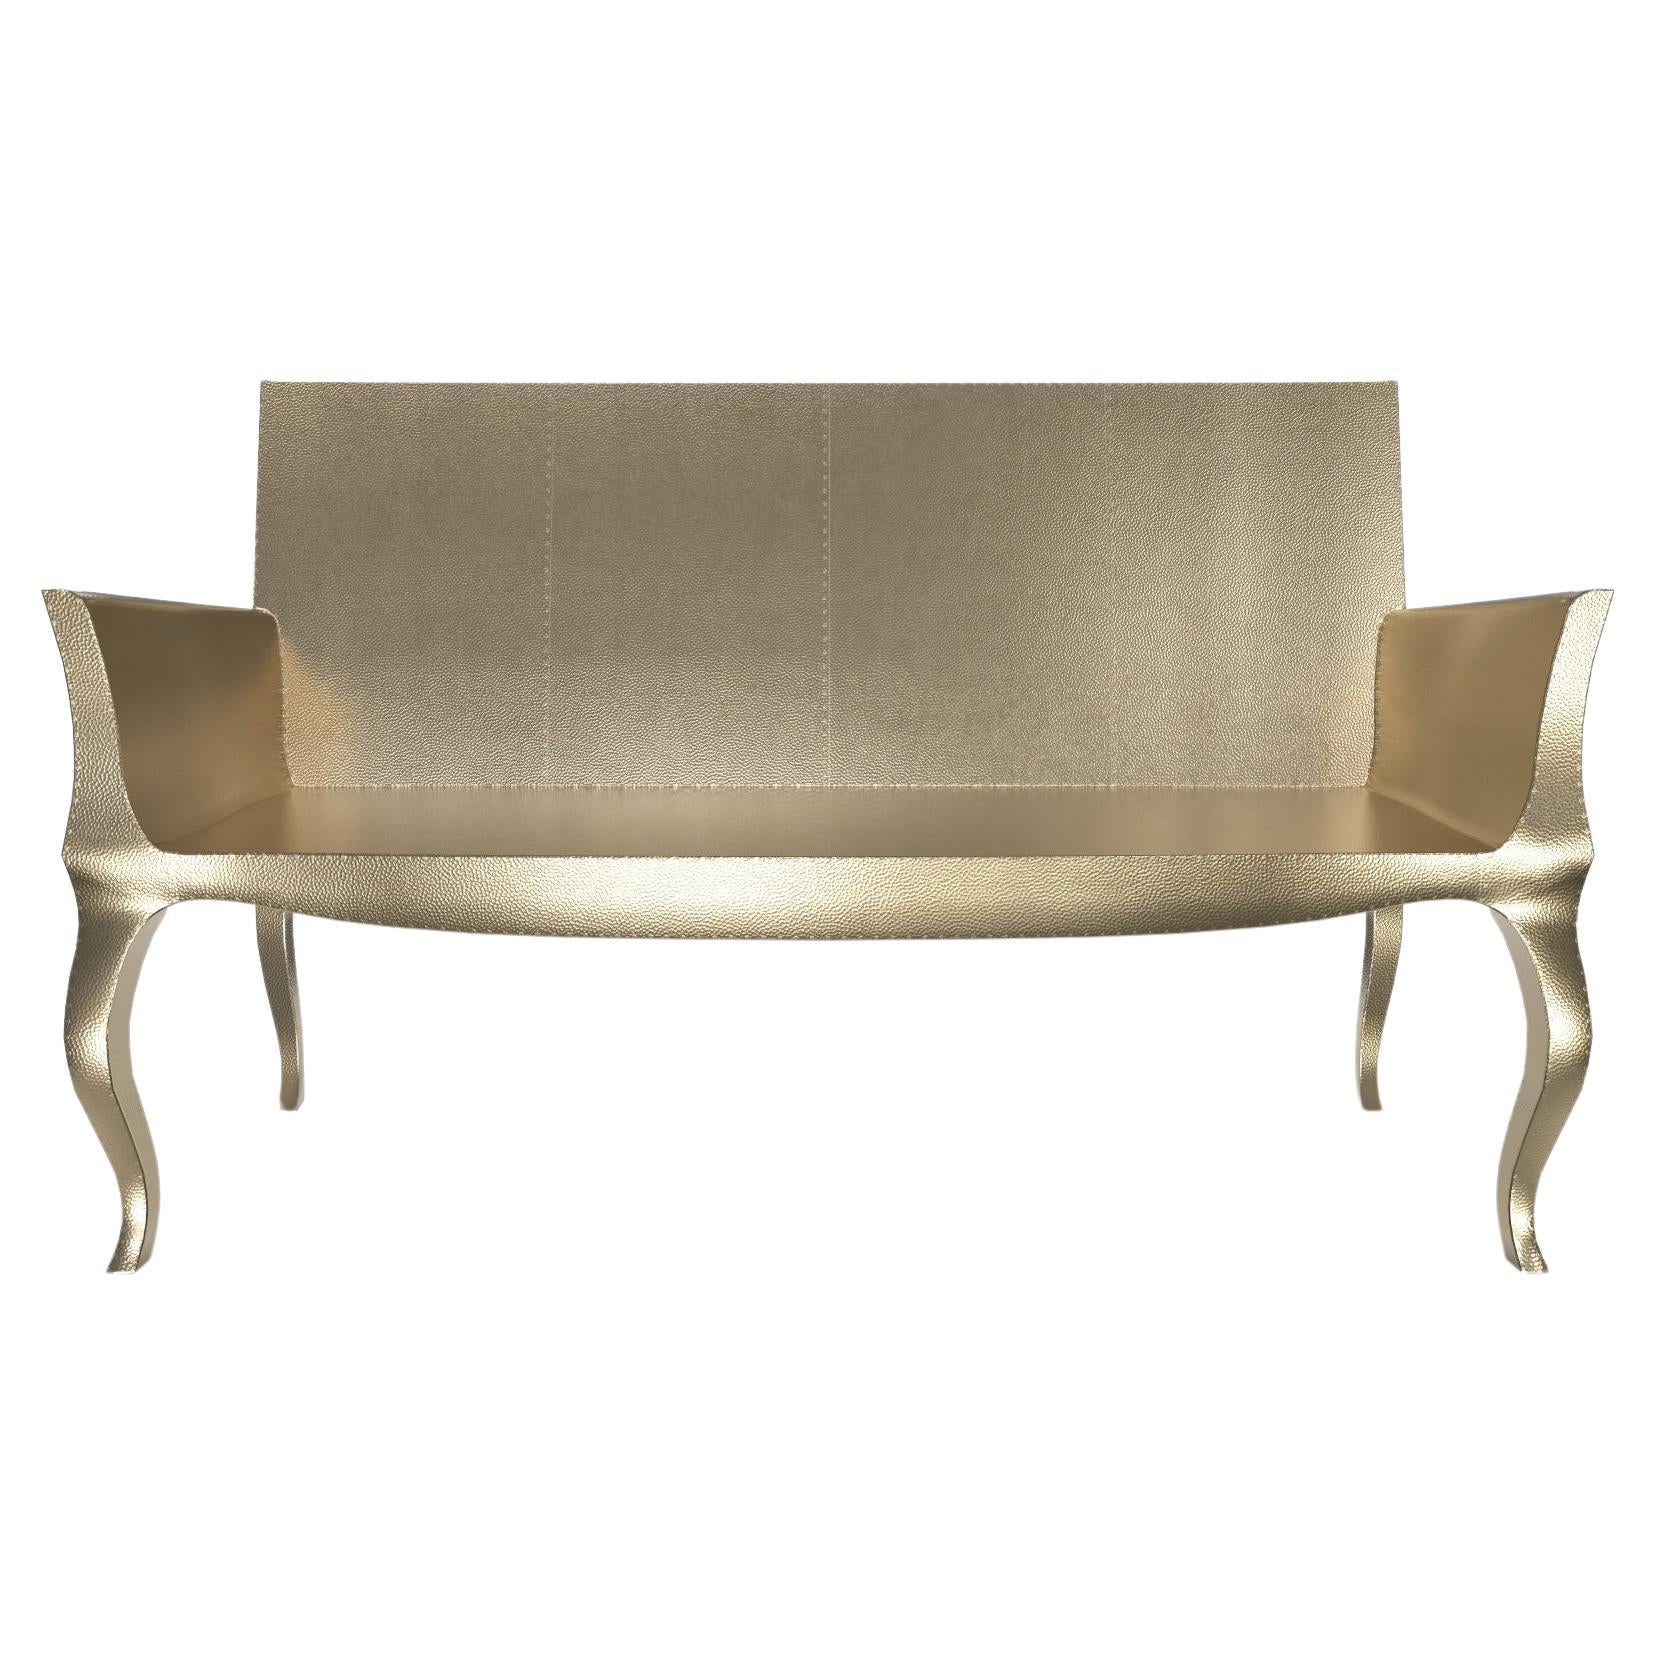 Louise Settee Art Deco Loveseats in Mid. Hammered Brass by Paul Mathieu